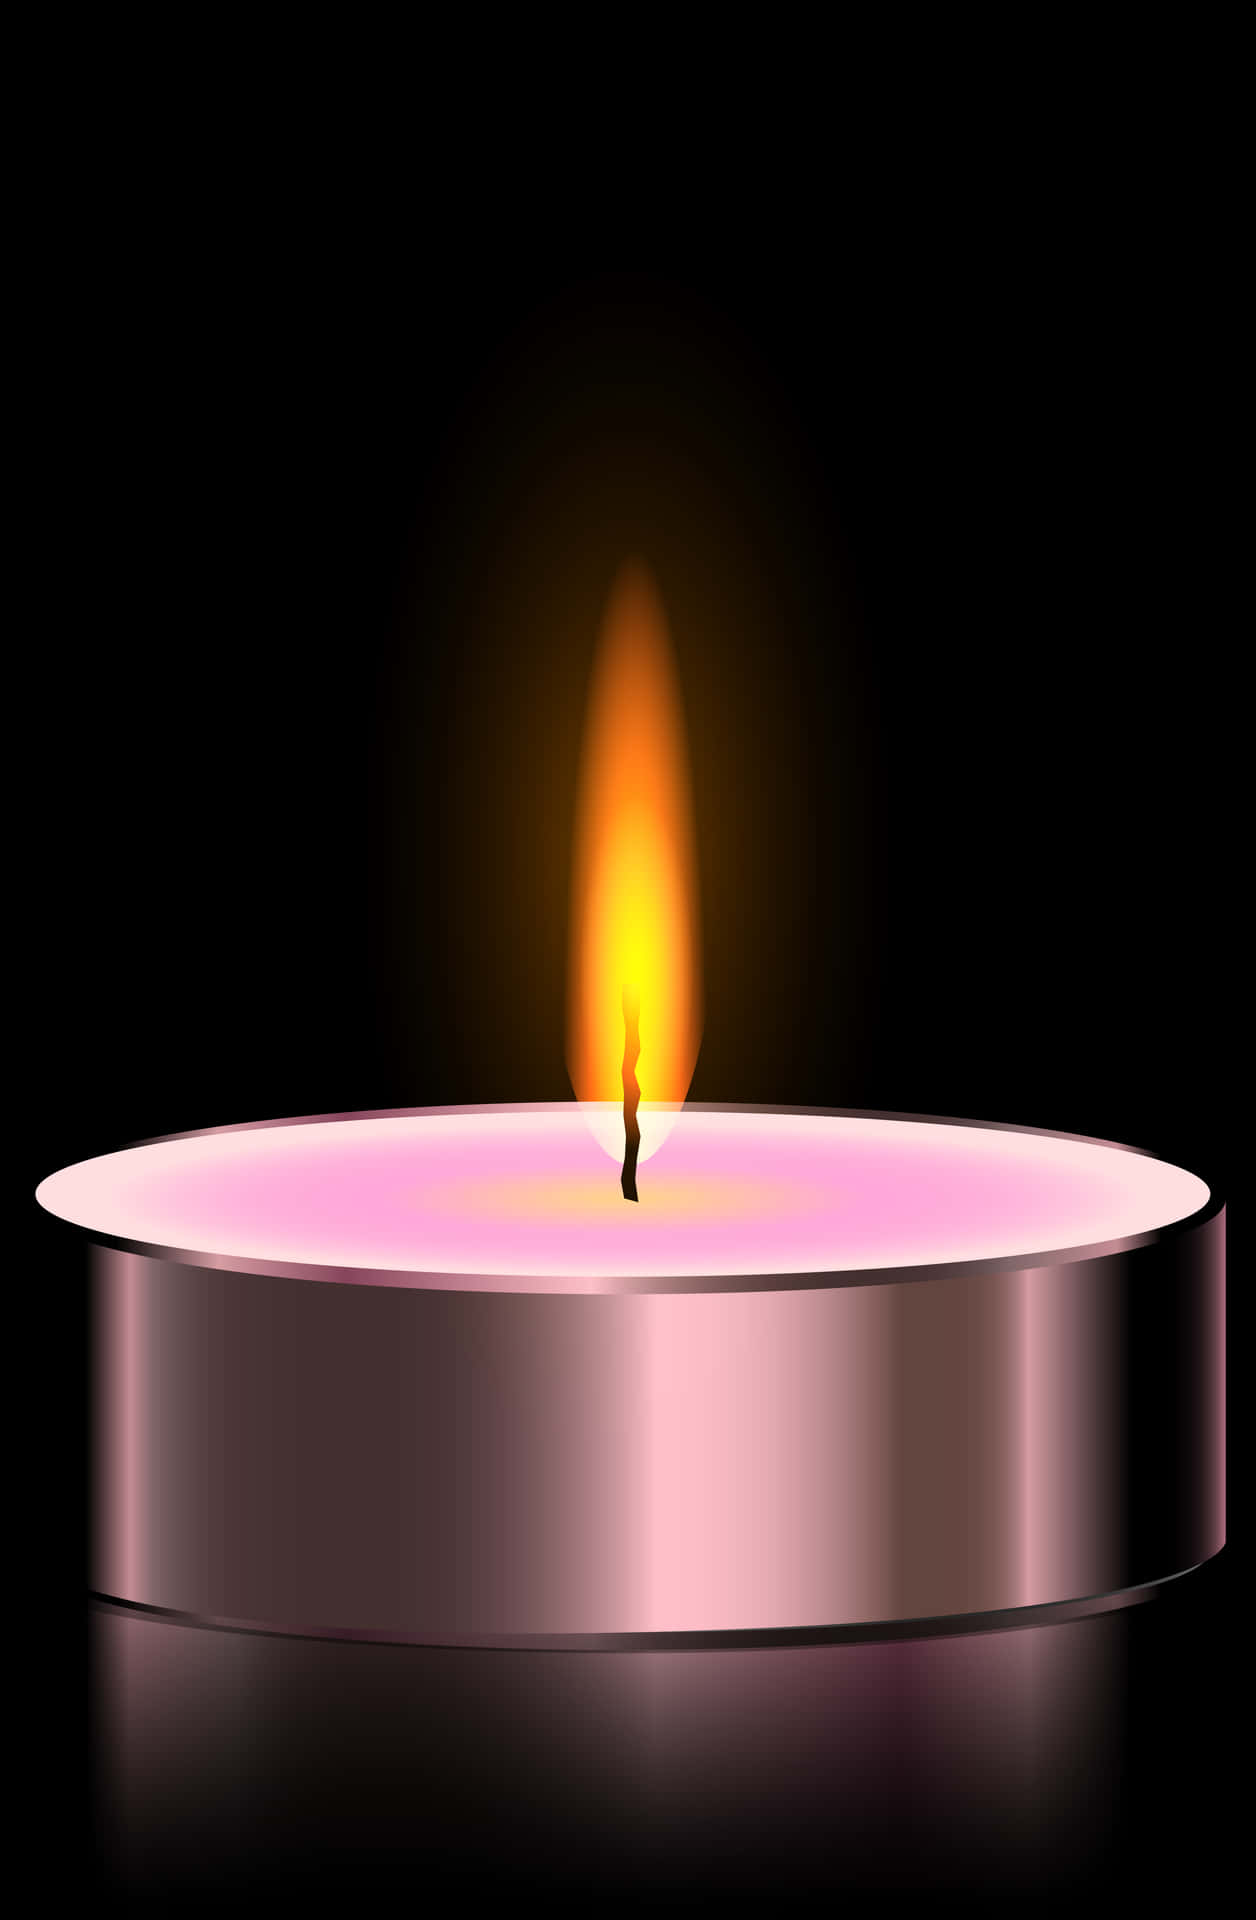 Illuminated Tealight Candle Flame PNG